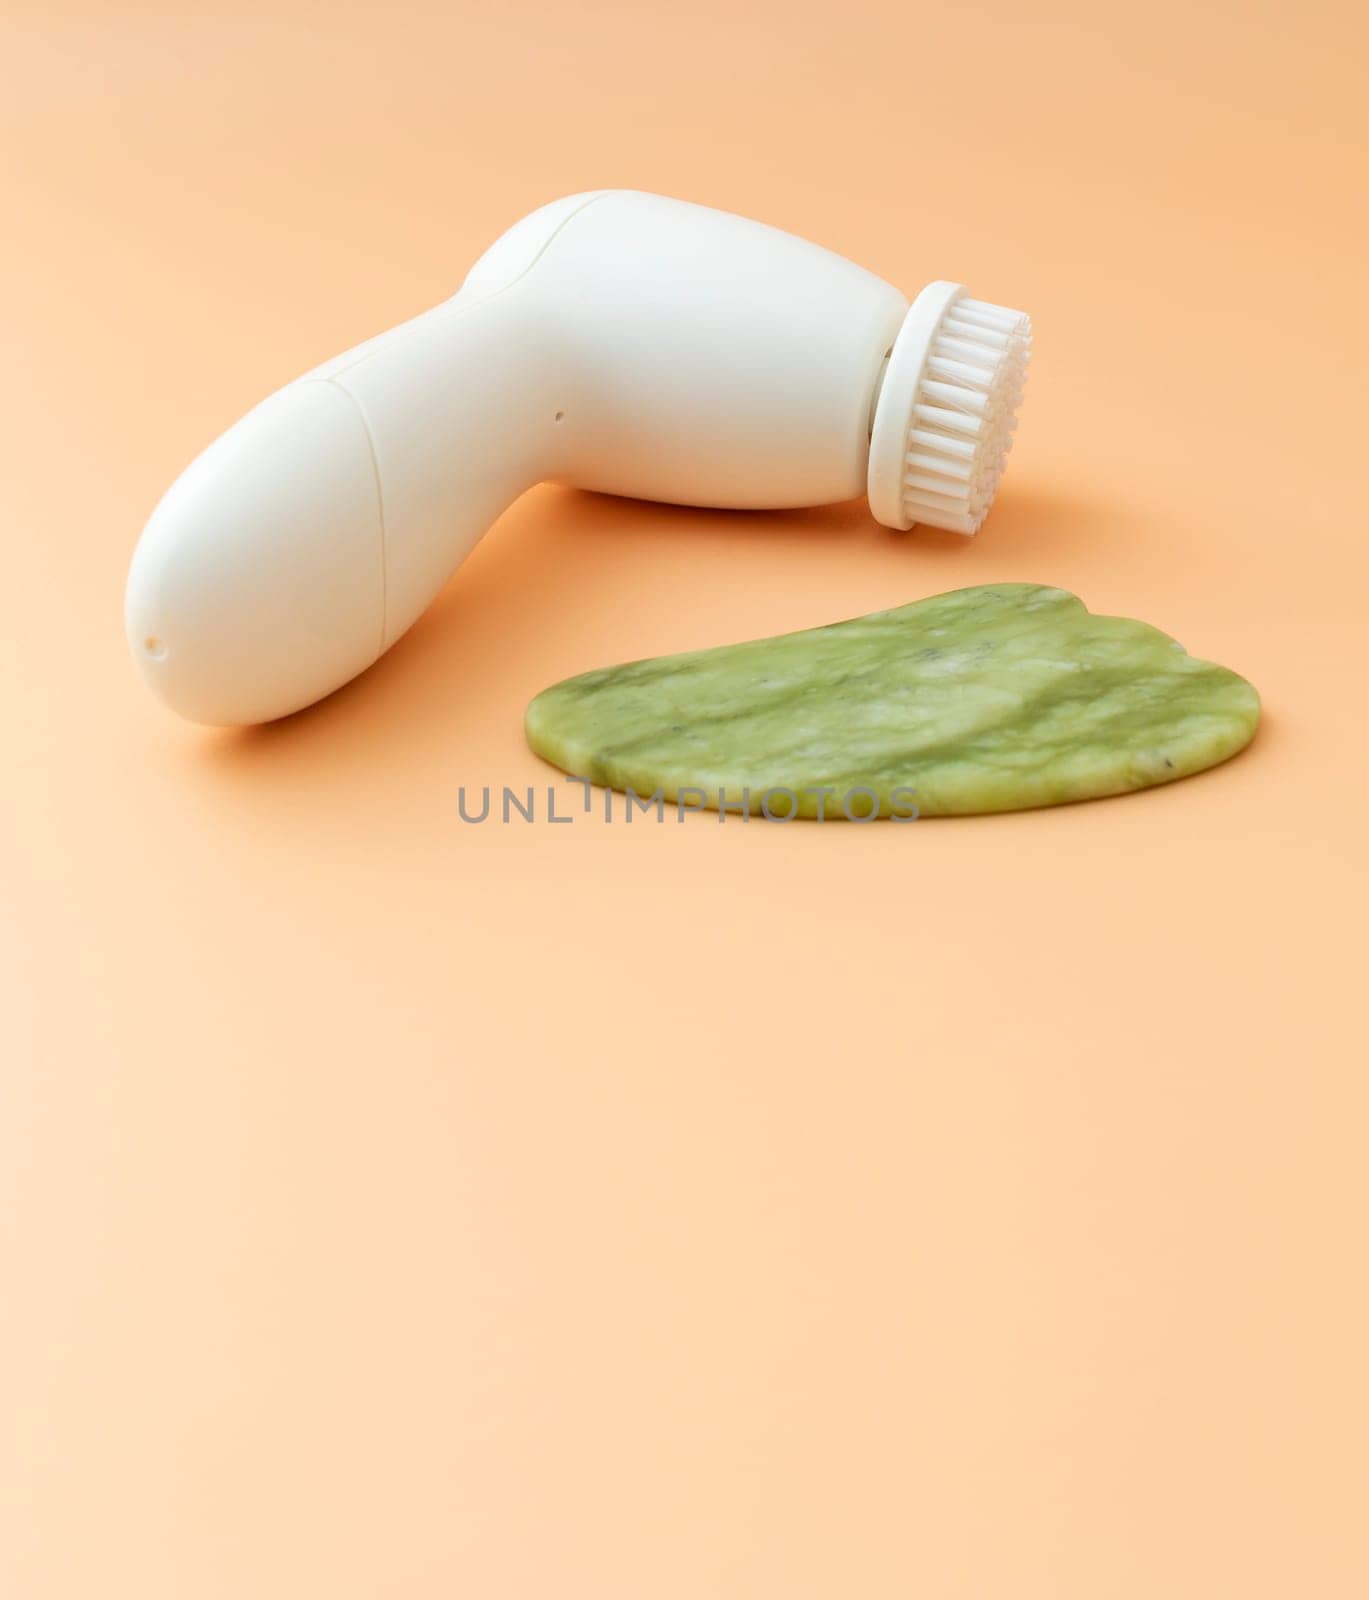 Flatly Mockup Skin Care Products. Facial Tool Gua Sha, Anti-Aging, Facial Cleansing Brush on Beige Background. Skin Beauty Device, Copy Space For Text. Vertical. by netatsi